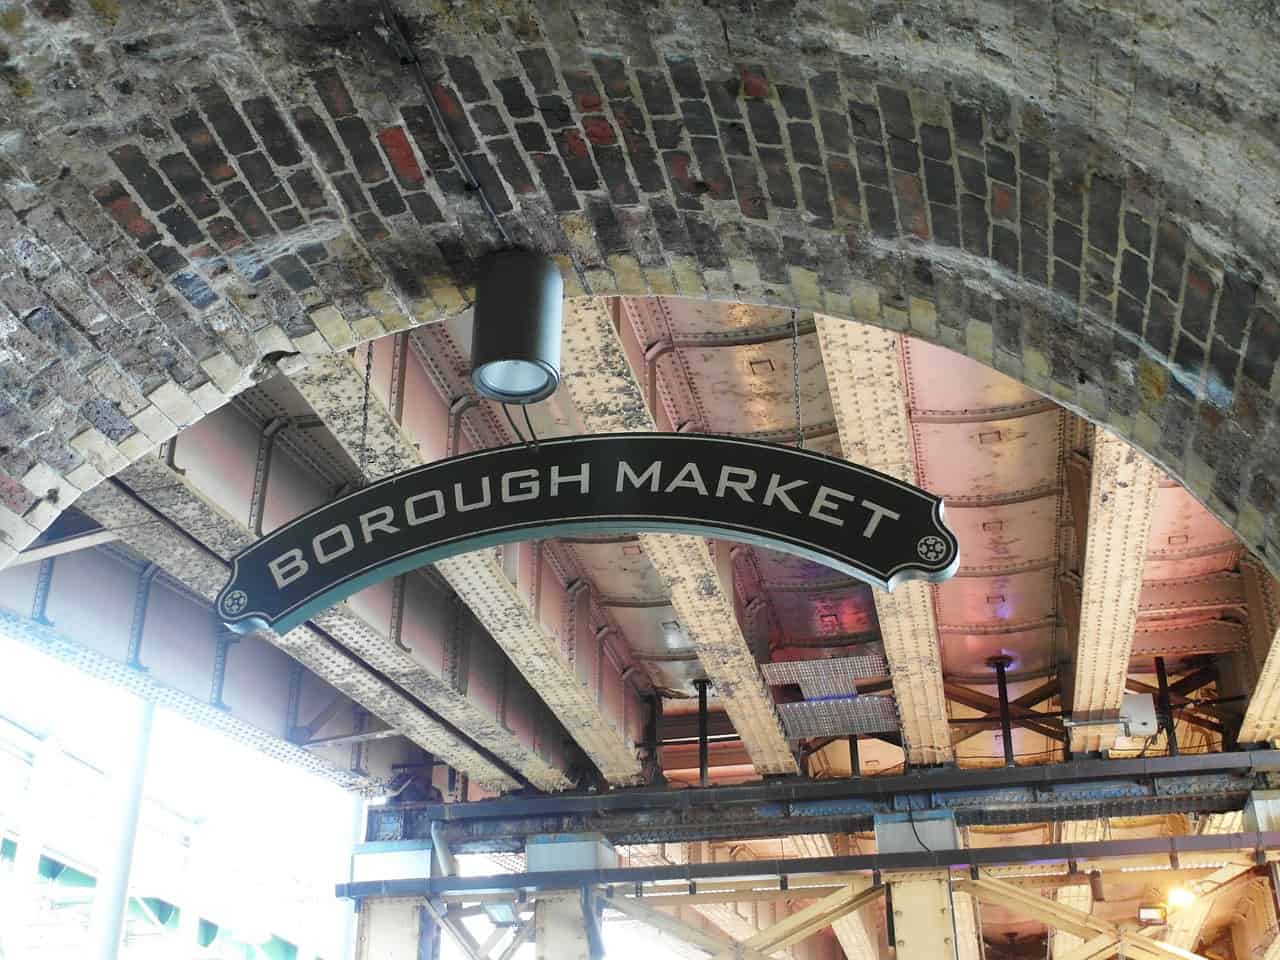 The Borough Market is one of the best spots to find food in London. Image source: Pixabay user hjjeon.